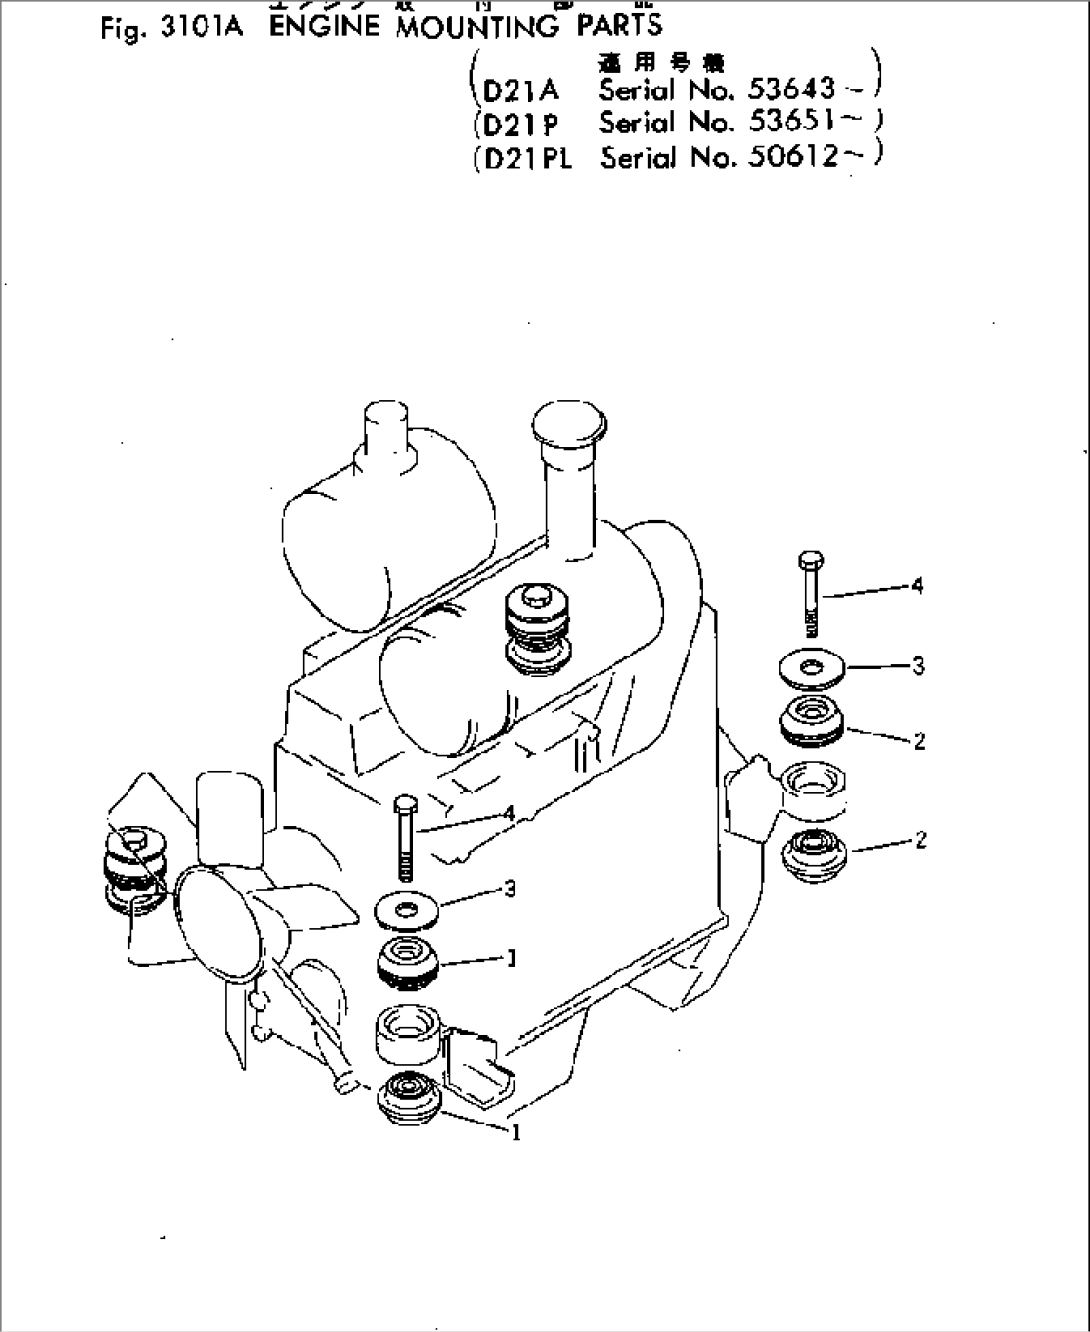 ENGINE MOUNTING PARTS(#53643-)